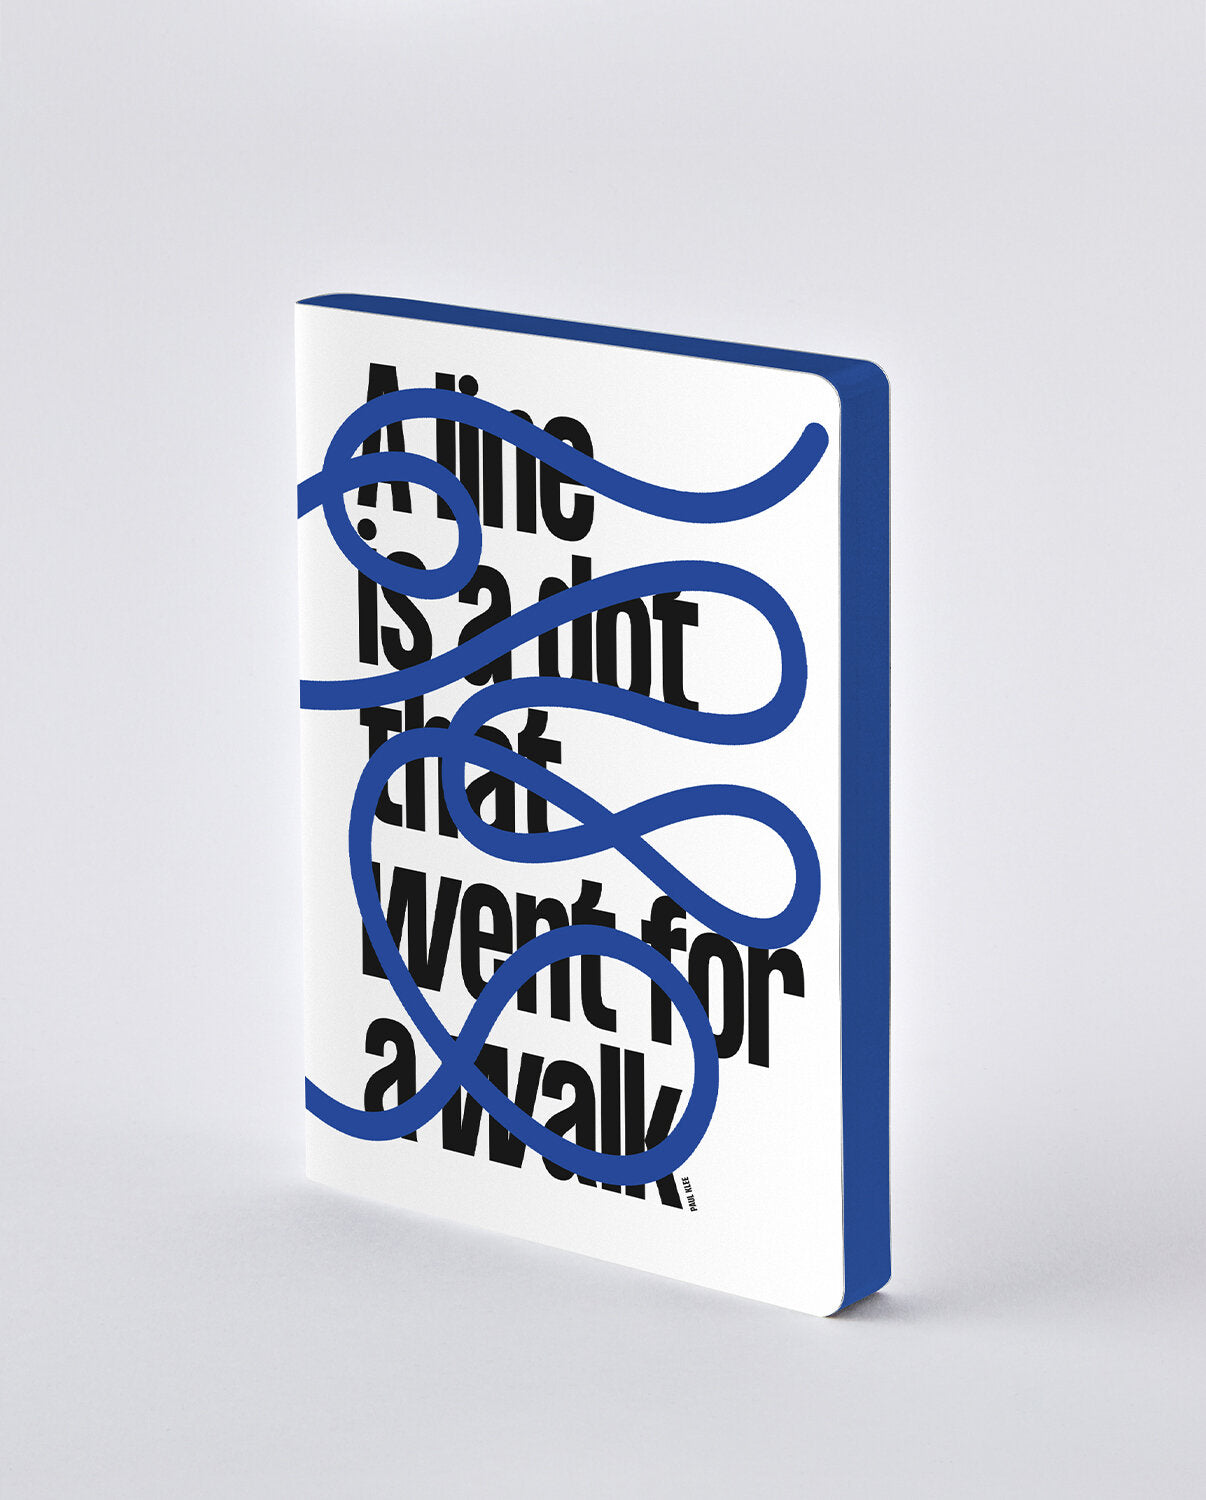 A Line is a Dot: Notebook Graphic L